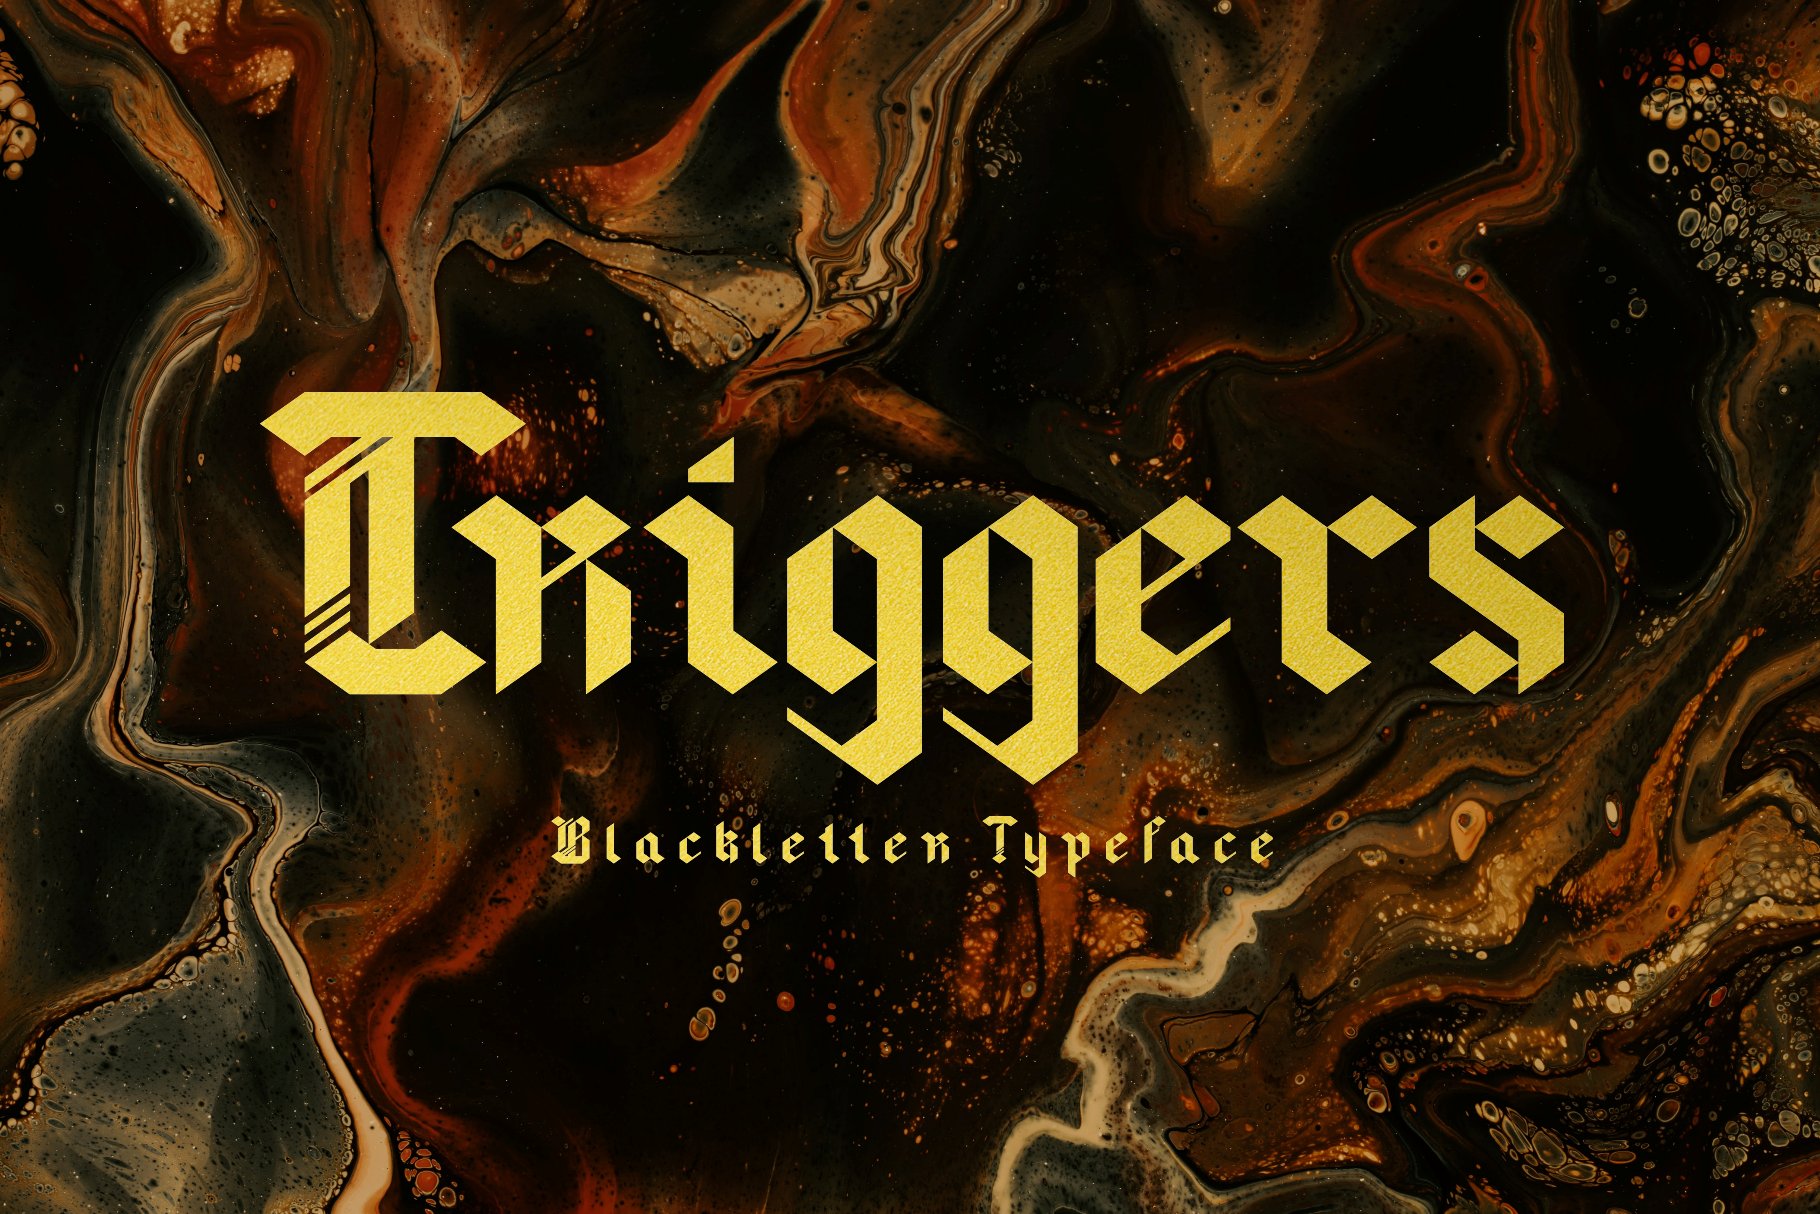 Triggers cover image.